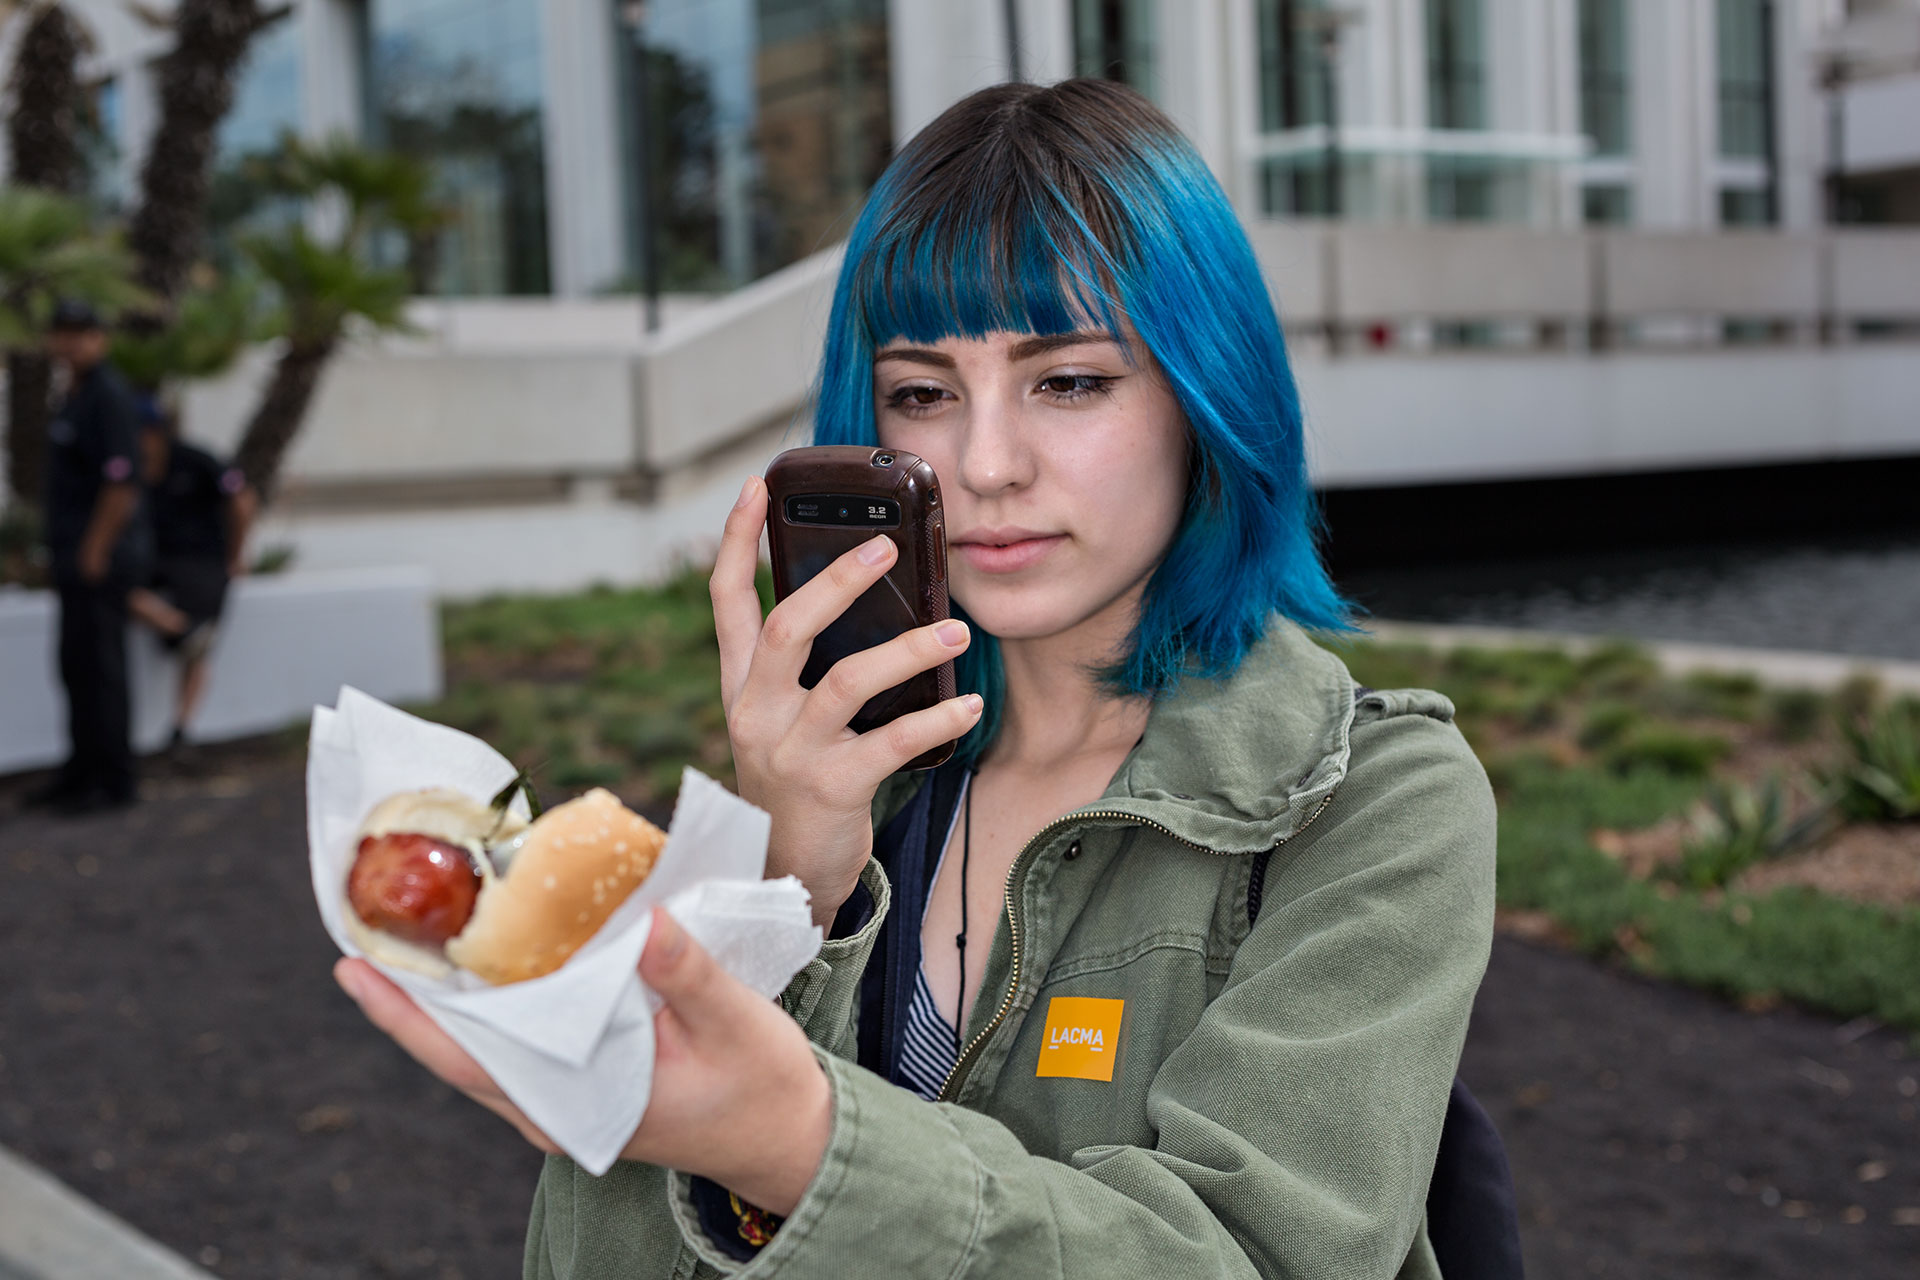  Snapping photos and sharing via social media are as much a part of street food culture as the food itself.  Los Angeles, CA.  